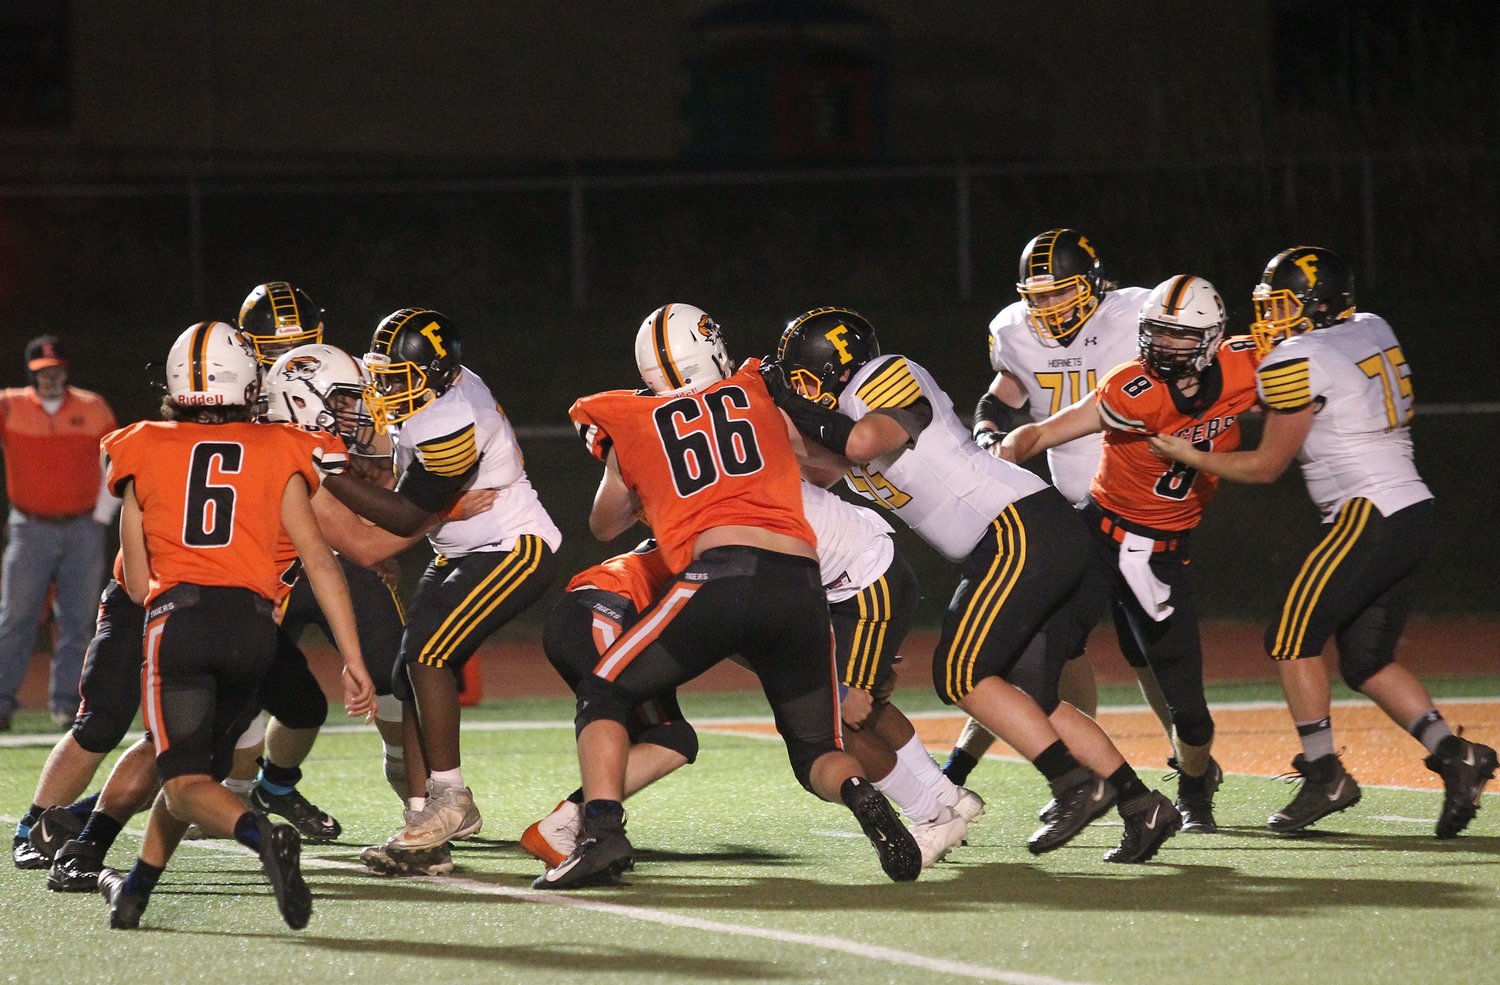 Photos from Friday's football game where Kirksville beat Fulton 33-0